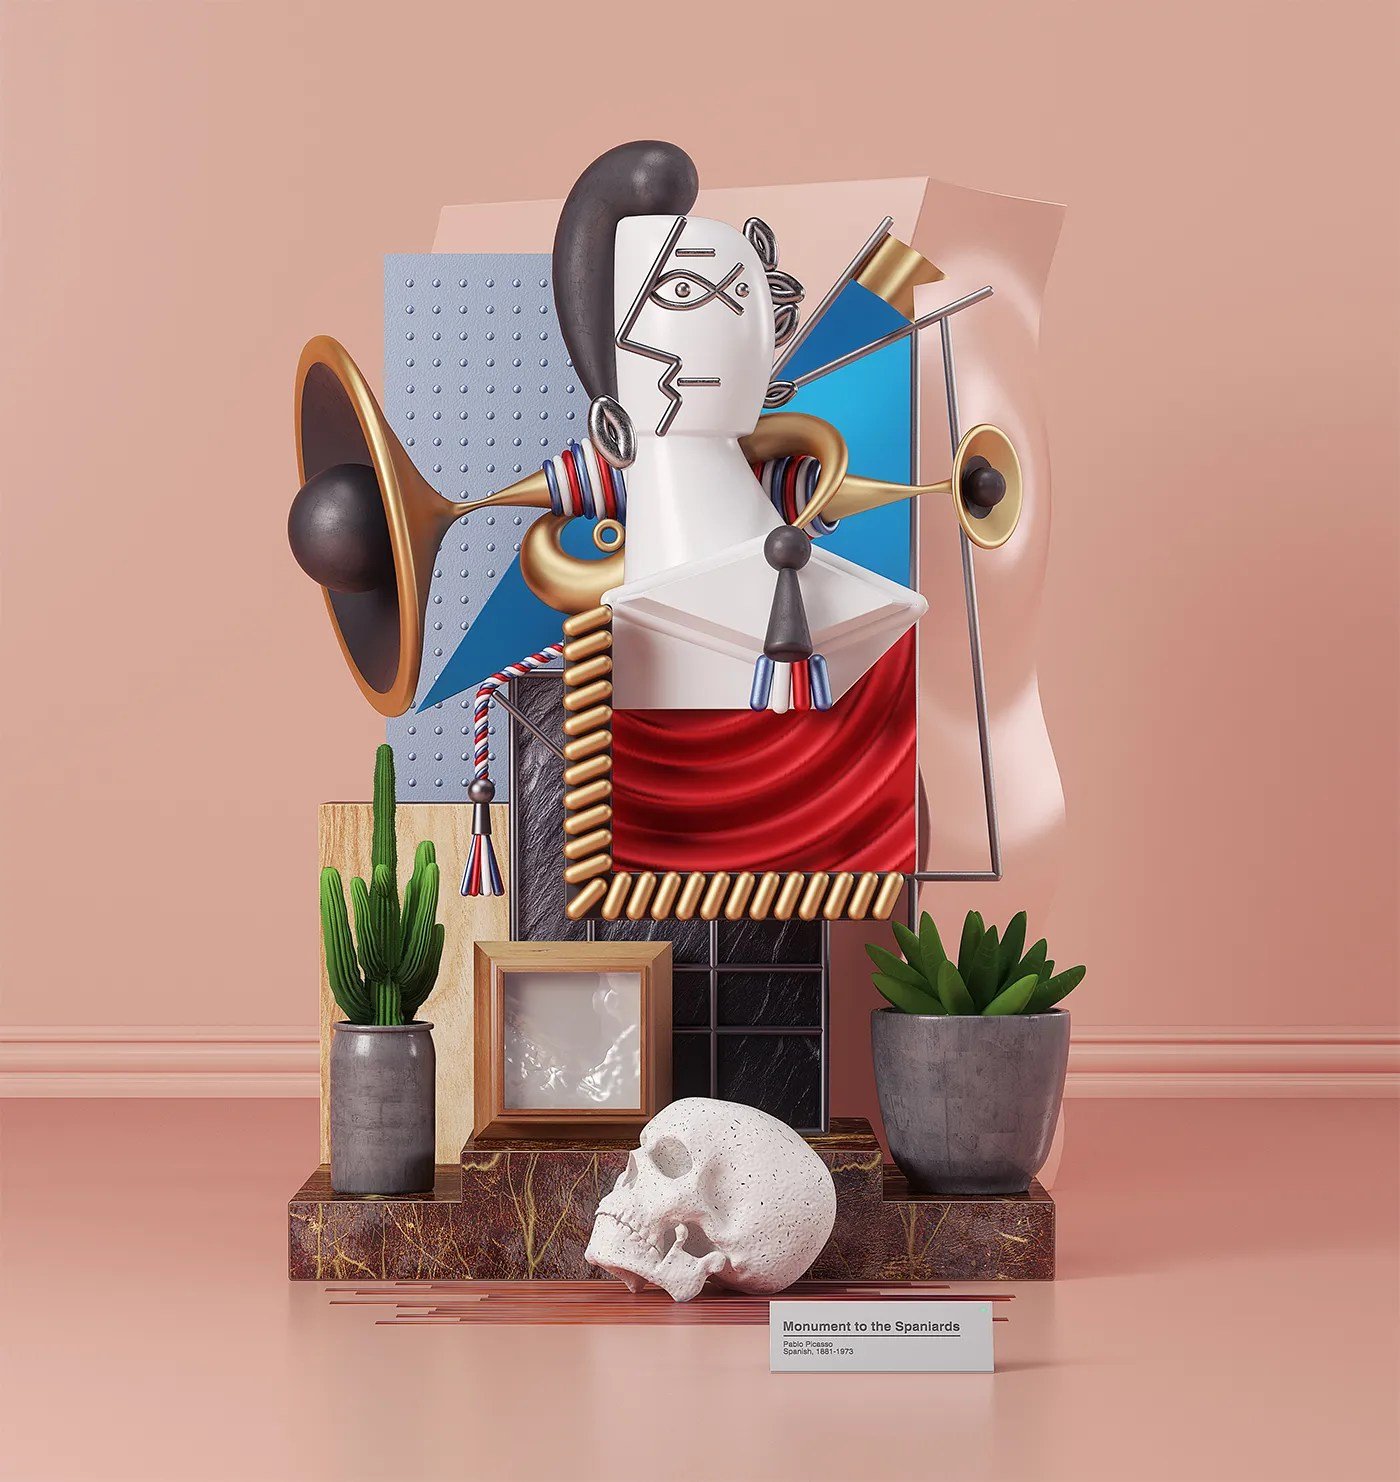 Iconic Picasso Paintings Turned into Stunning 3D Sculpture